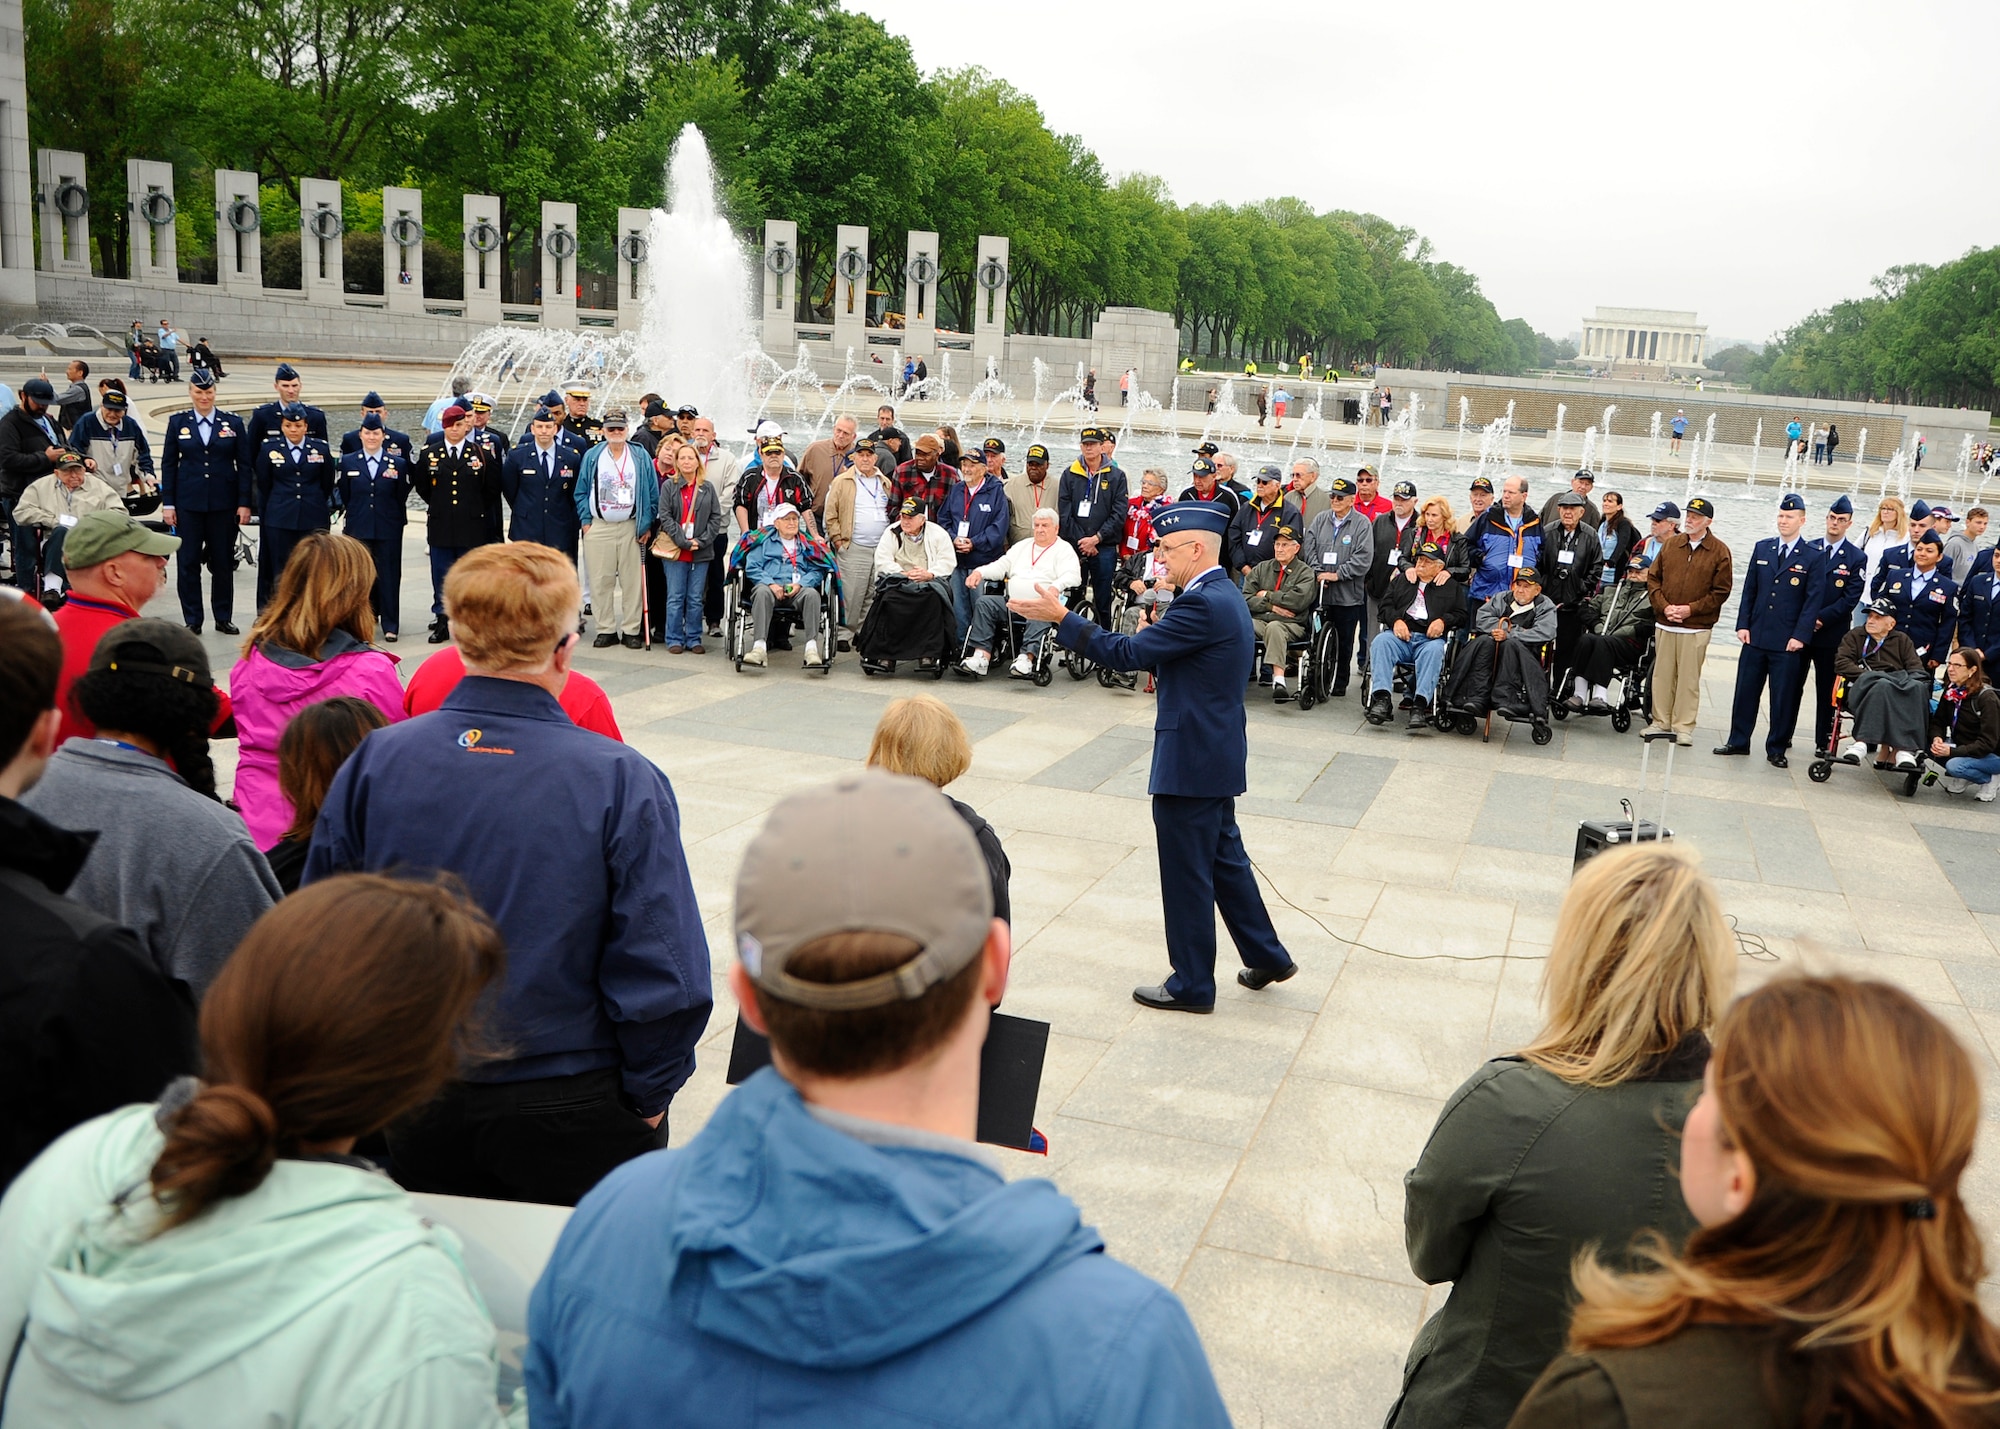 Lt. Gen. Arnold W. Bunch Jr., the military deputy for the Air Force’s assistant secretary for acquisition, speaks to the Georgia Honor Flight and onlookers at the National World War II Memorial in Washington, D.C., April 30, 2016. The Georgia Honor Flight was one of many such flights to visit the nation’s capital through the Honor Flight Network. (U.S. Air Force photo/Tech. Sgt. Bryan Franks)